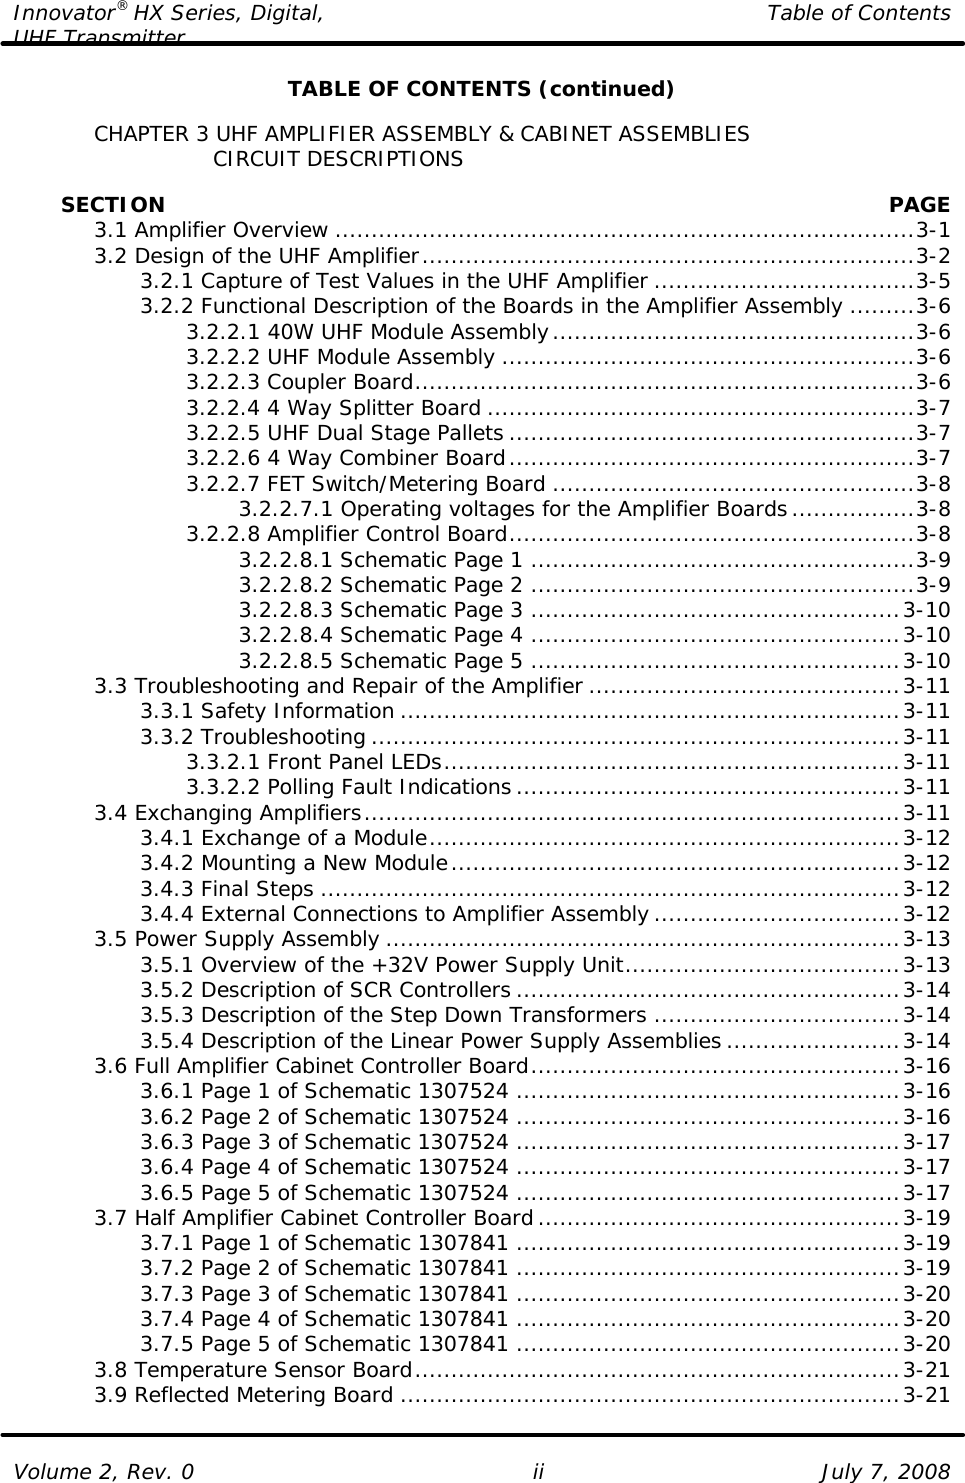 Innovator® HX Series, Digital, Table of Contents UHF Transmitter  Volume 2, Rev. 0 ii July 7, 2008 TABLE OF CONTENTS (continued)   CHAPTER 3 UHF AMPLIFIER ASSEMBLY &amp; CABINET ASSEMBLIES                   CIRCUIT DESCRIPTIONS           SECTION    PAGE  3.1 Amplifier Overview ................................................................................3-1  3.2 Design of the UHF Amplifier....................................................................3-2     3.2.1 Capture of Test Values in the UHF Amplifier ....................................3-5     3.2.2 Functional Description of the Boards in the Amplifier Assembly .........3-6     3.2.2.1 40W UHF Module Assembly..................................................3-6     3.2.2.2 UHF Module Assembly .........................................................3-6     3.2.2.3 Coupler Board.....................................................................3-6     3.2.2.4 4 Way Splitter Board ...........................................................3-7     3.2.2.5 UHF Dual Stage Pallets ........................................................3-7     3.2.2.6 4 Way Combiner Board........................................................3-7     3.2.2.7 FET Switch/Metering Board ..................................................3-8         3.2.2.7.1 Operating voltages for the Amplifier Boards.................3-8     3.2.2.8 Amplifier Control Board........................................................3-8         3.2.2.8.1 Schematic Page 1 .....................................................3-9         3.2.2.8.2 Schematic Page 2 .....................................................3-9         3.2.2.8.3 Schematic Page 3 ...................................................3-10         3.2.2.8.4 Schematic Page 4 ...................................................3-10         3.2.2.8.5 Schematic Page 5 ...................................................3-10  3.3 Troubleshooting and Repair of the Amplifier ...........................................3-11     3.3.1 Safety Information .....................................................................3-11     3.3.2 Troubleshooting .........................................................................3-11     3.3.2.1 Front Panel LEDs...............................................................3-11     3.3.2.2 Polling Fault Indications .....................................................3-11  3.4 Exchanging Amplifiers..........................................................................3-11     3.4.1 Exchange of a Module.................................................................3-12     3.4.2 Mounting a New Module..............................................................3-12     3.4.3 Final Steps ................................................................................3-12     3.4.4 External Connections to Amplifier Assembly ..................................3-12  3.5 Power Supply Assembly .......................................................................3-13     3.5.1 Overview of the +32V Power Supply Unit......................................3-13     3.5.2 Description of SCR Controllers .....................................................3-14     3.5.3 Description of the Step Down Transformers ..................................3-14     3.5.4 Description of the Linear Power Supply Assemblies ........................3-14  3.6 Full Amplifier Cabinet Controller Board...................................................3-16     3.6.1 Page 1 of Schematic 1307524 .....................................................3-16     3.6.2 Page 2 of Schematic 1307524 .....................................................3-16     3.6.3 Page 3 of Schematic 1307524 .....................................................3-17     3.6.4 Page 4 of Schematic 1307524 .....................................................3-17     3.6.5 Page 5 of Schematic 1307524 .....................................................3-17  3.7 Half Amplifier Cabinet Controller Board..................................................3-19     3.7.1 Page 1 of Schematic 1307841 .....................................................3-19     3.7.2 Page 2 of Schematic 1307841 .....................................................3-19     3.7.3 Page 3 of Schematic 1307841 .....................................................3-20     3.7.4 Page 4 of Schematic 1307841 .....................................................3-20     3.7.5 Page 5 of Schematic 1307841 .....................................................3-20  3.8 Temperature Sensor Board...................................................................3-21  3.9 Reflected Metering Board .....................................................................3-21 